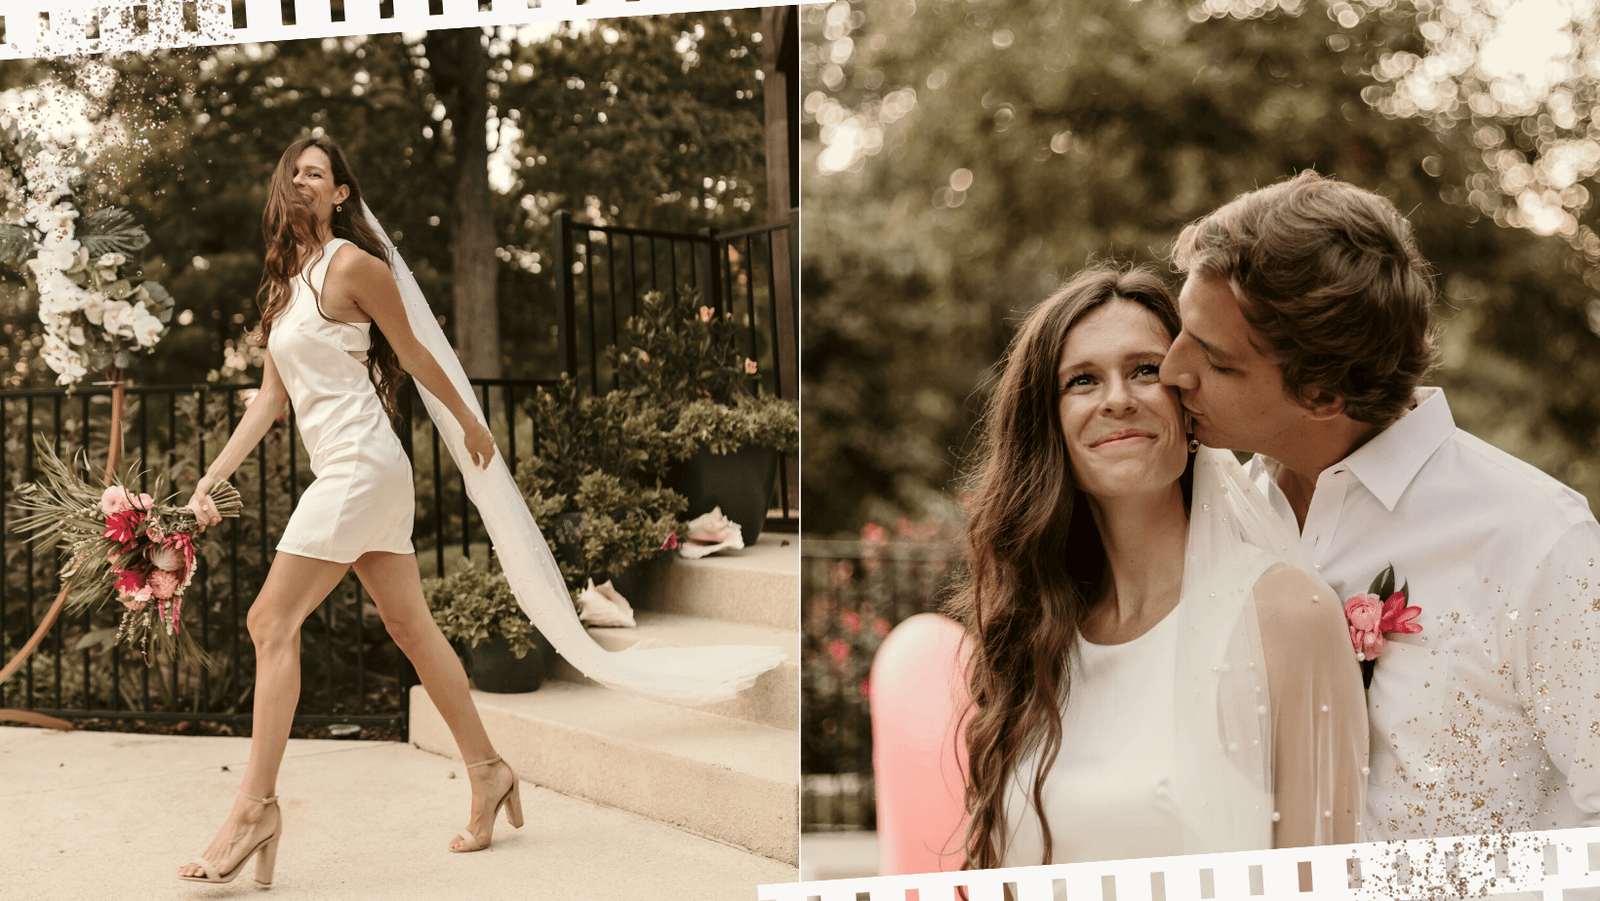 collage of a backyard elopement with bride walking, and second picture groom kissing bride on cheek.